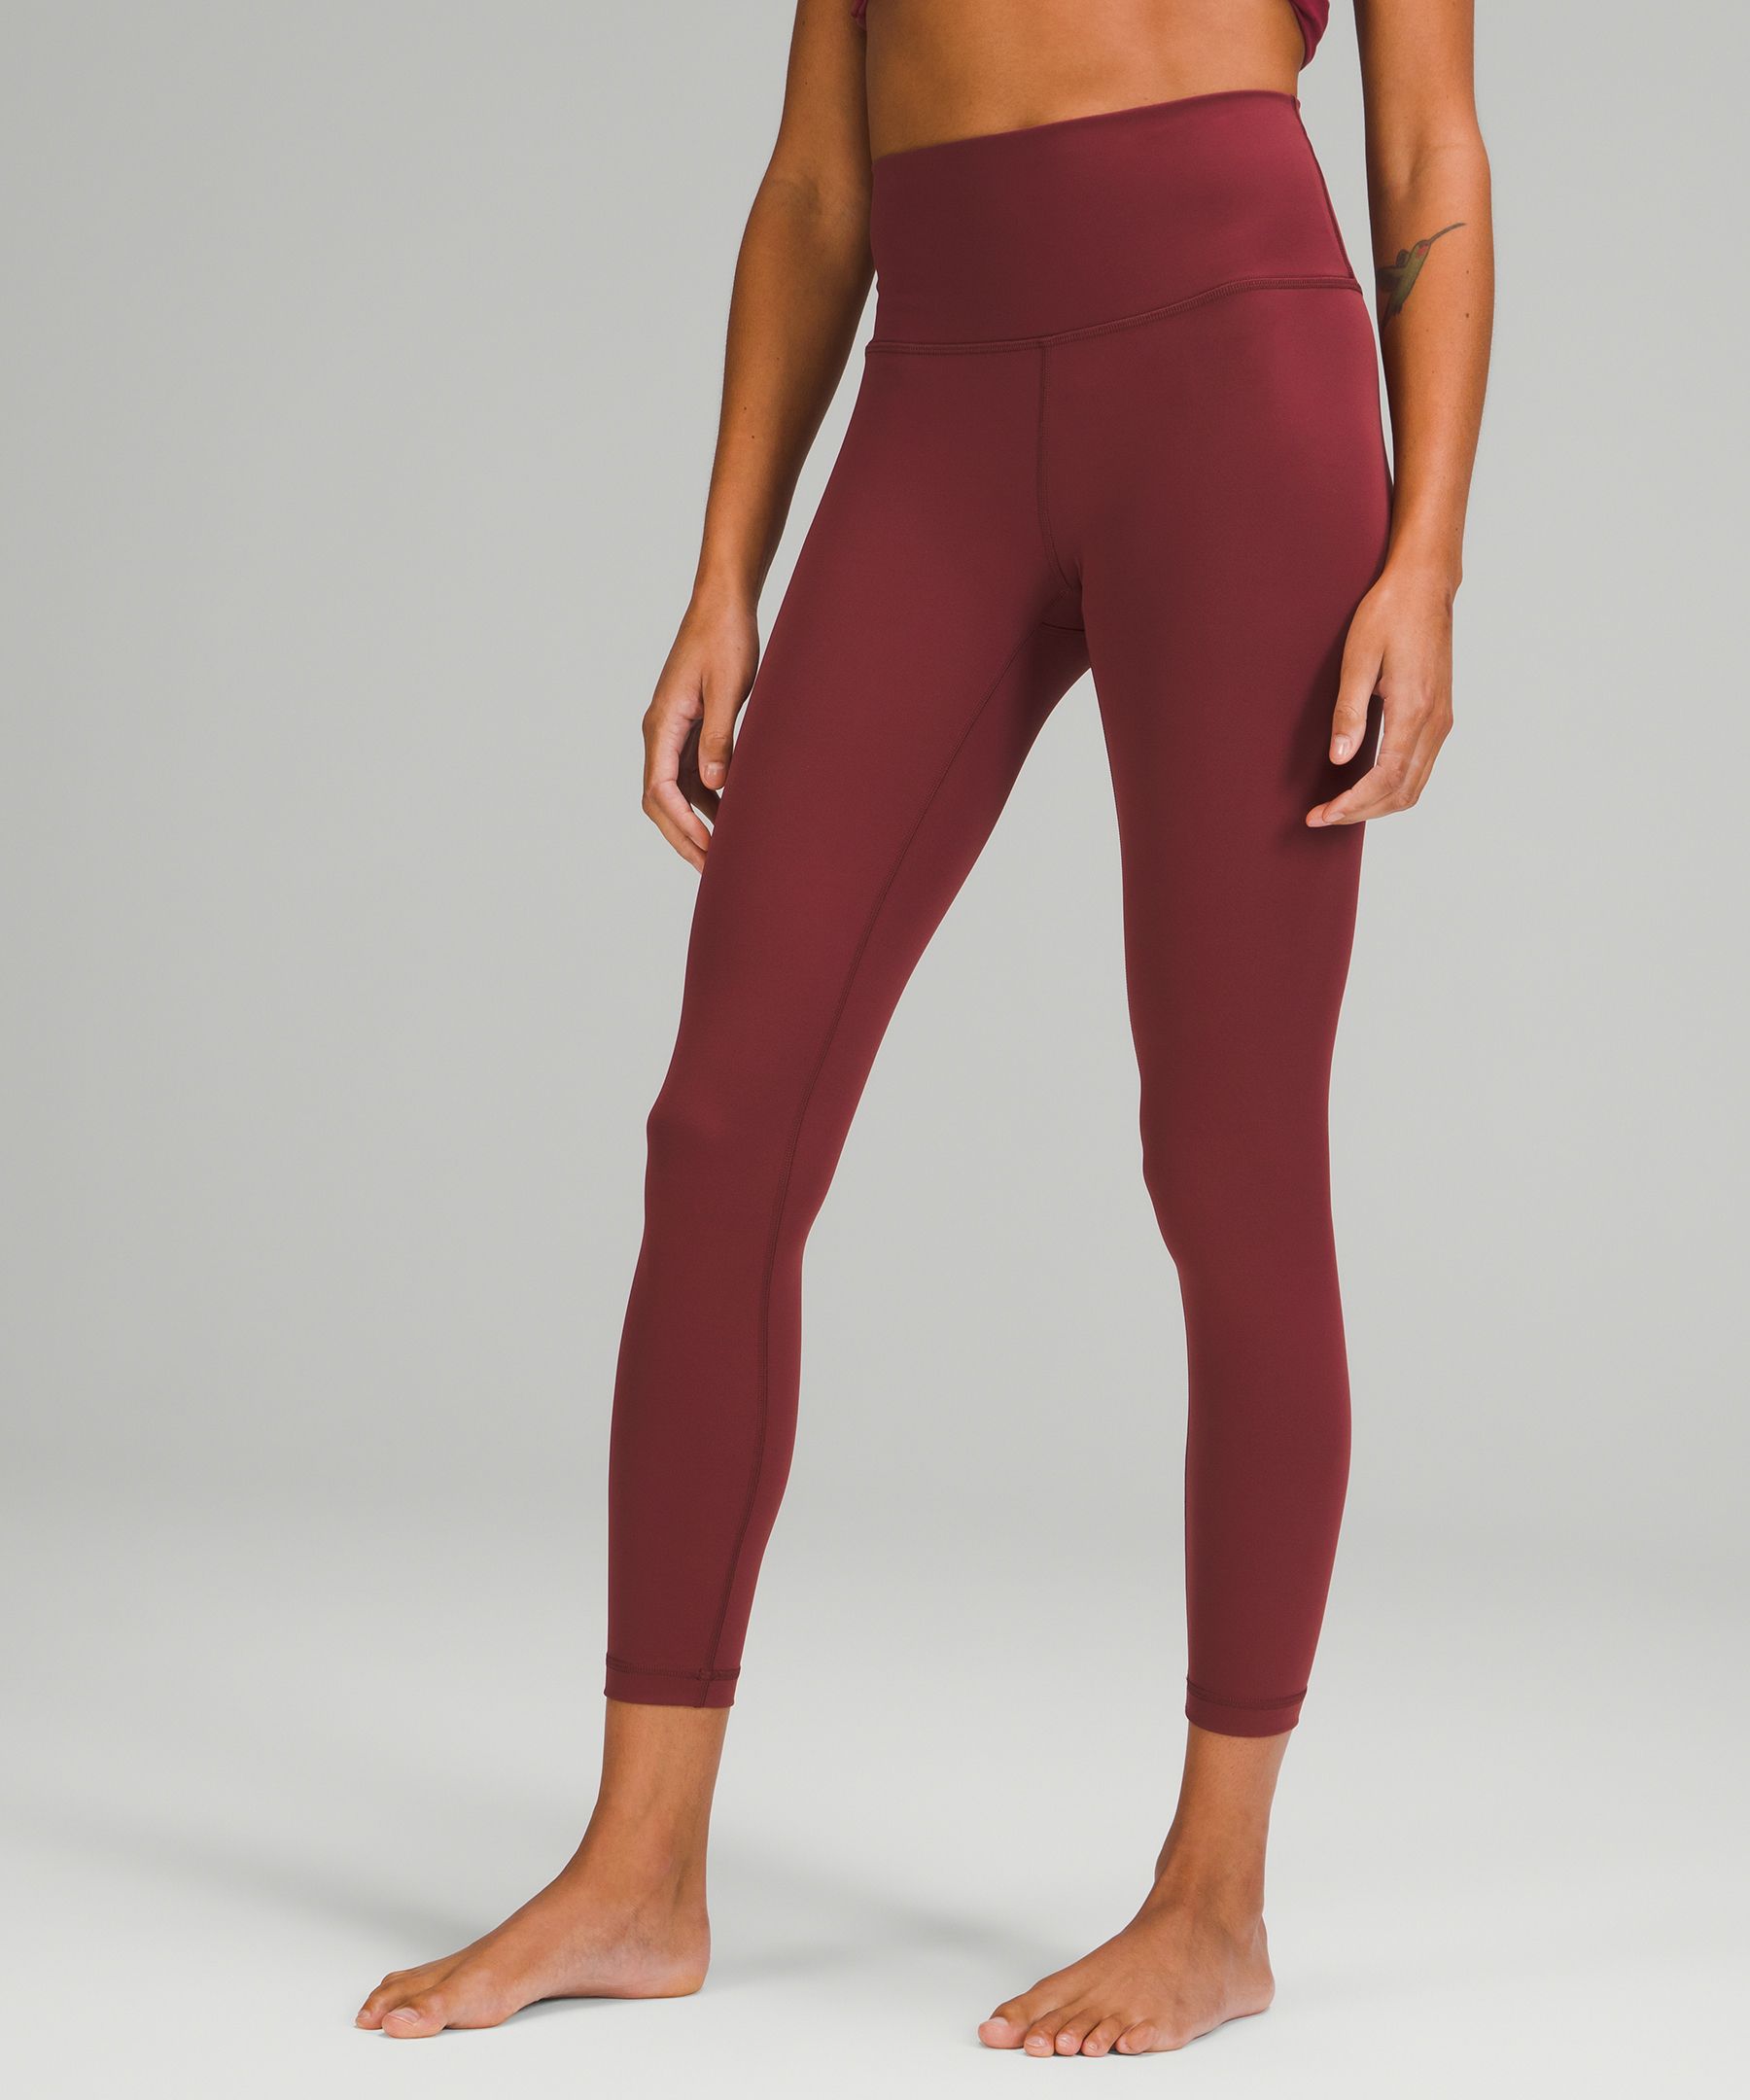 Lululemon Wunder Under High-rise Tights 25" Full-on Luxtreme In Mulled Wine